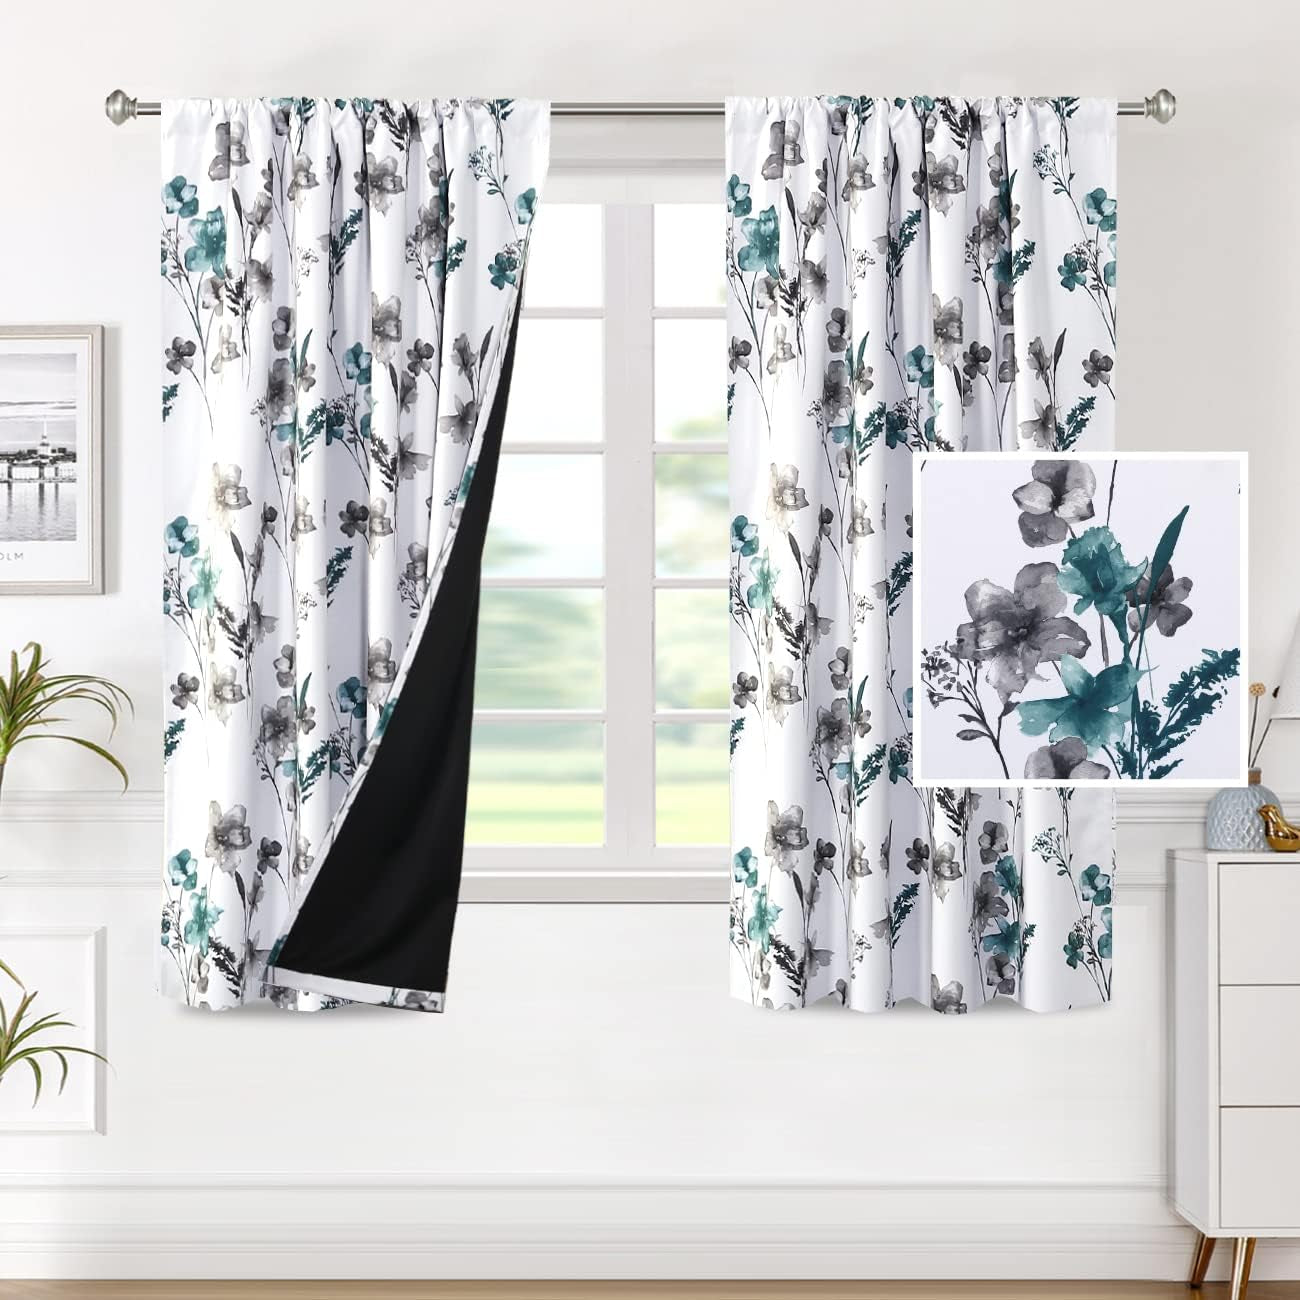 H.VERSAILTEX 100% Blackout Curtains for Bedroom Cattleya Floral Printed Drapes 84 Inches Long Leah Floral Pattern Full Light Blocking Drapes with Black Liner Rod Pocket 2 Panels, Navy/Taupe  H.VERSAILTEX Grey/Teal 52"W X 63"L 